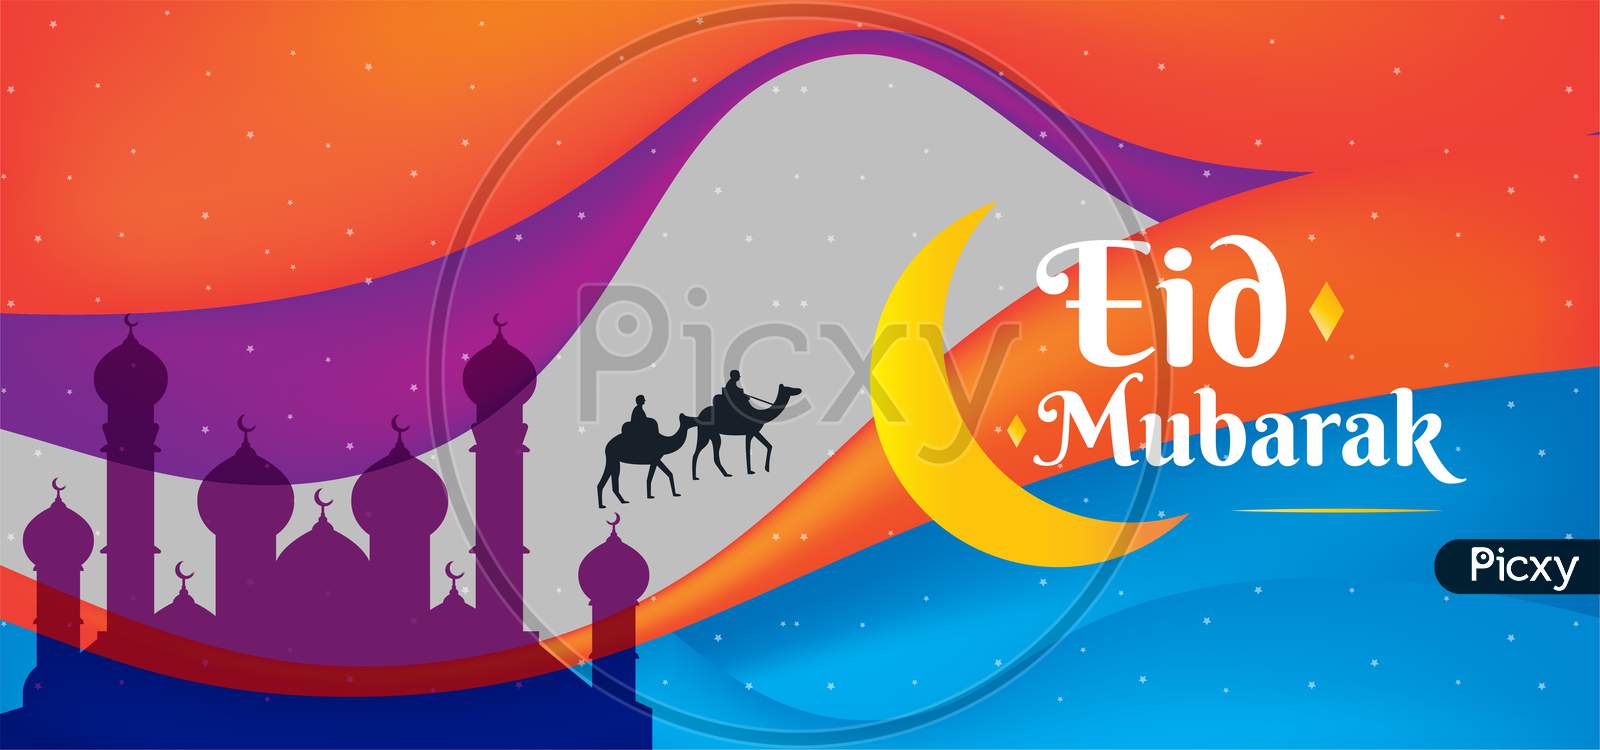 Eid Mubarak Colorful Greeting Wish Poster With Camels And Men, Illustration Vector